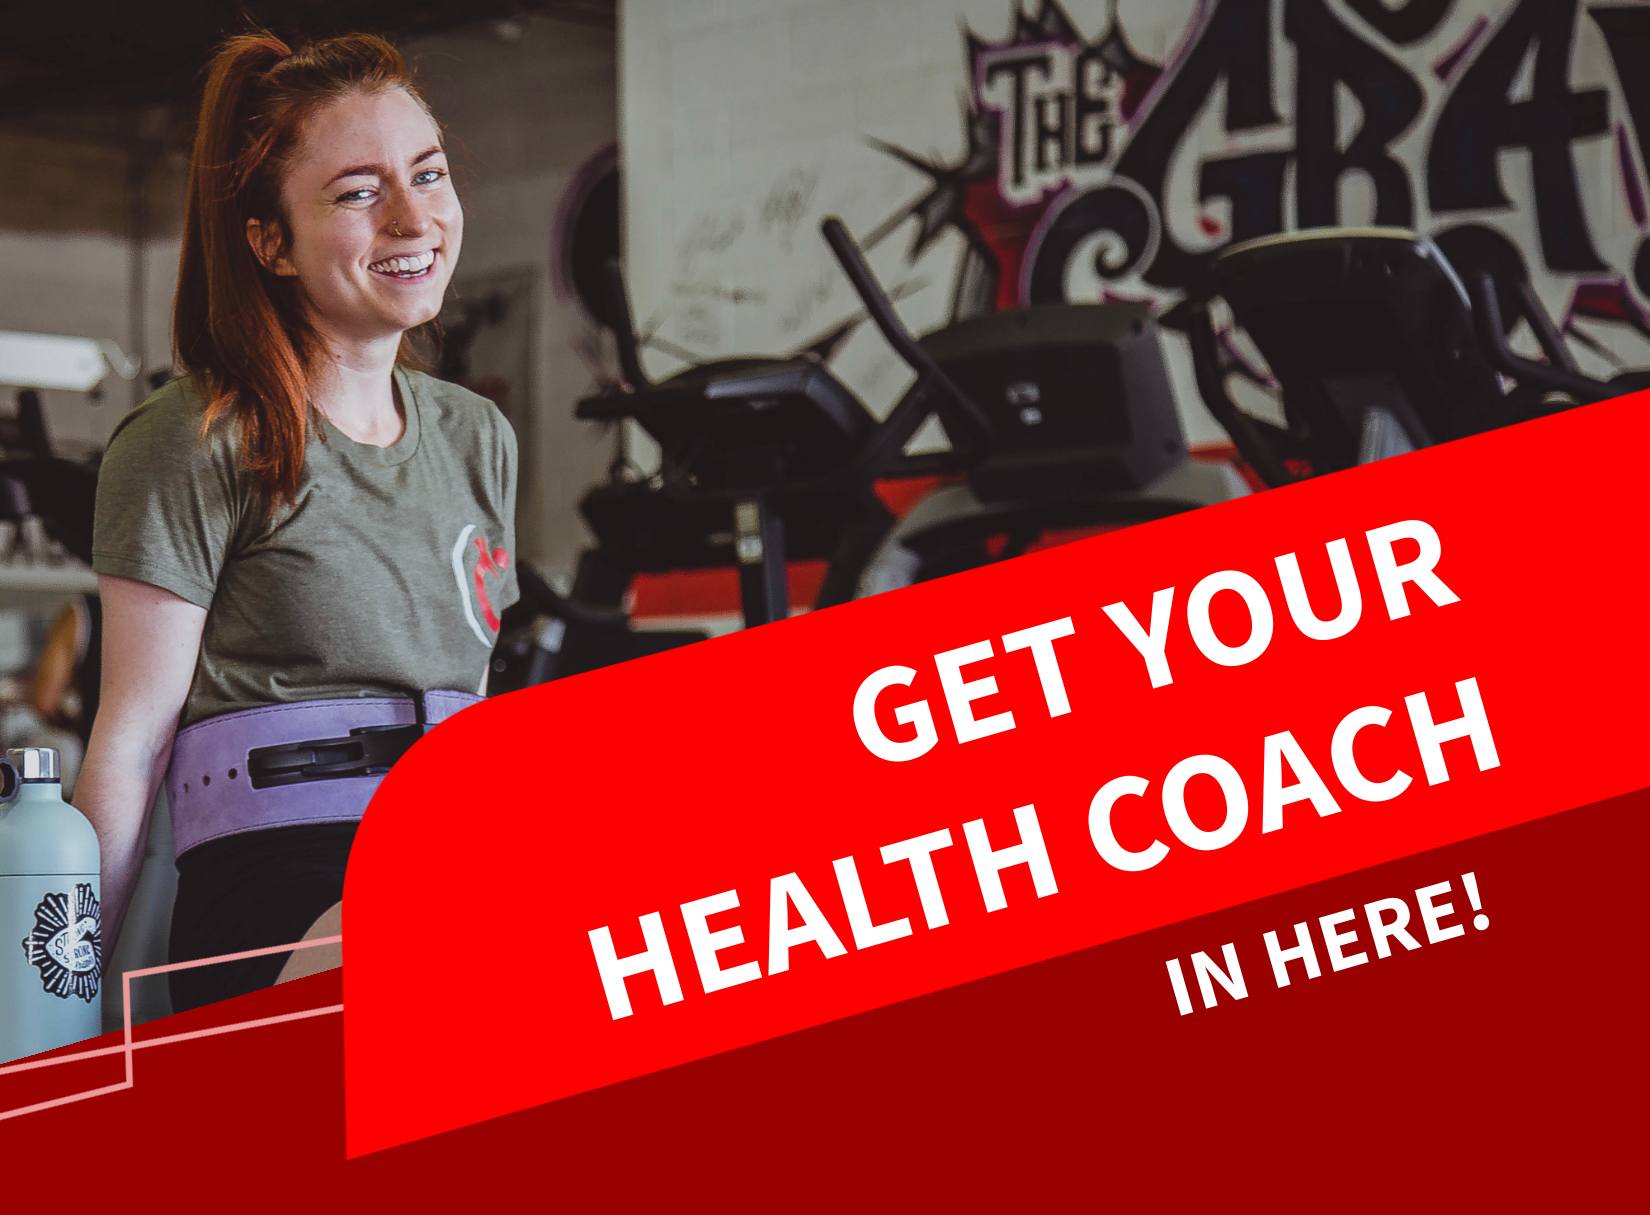 FIndHealthcoaches.com link